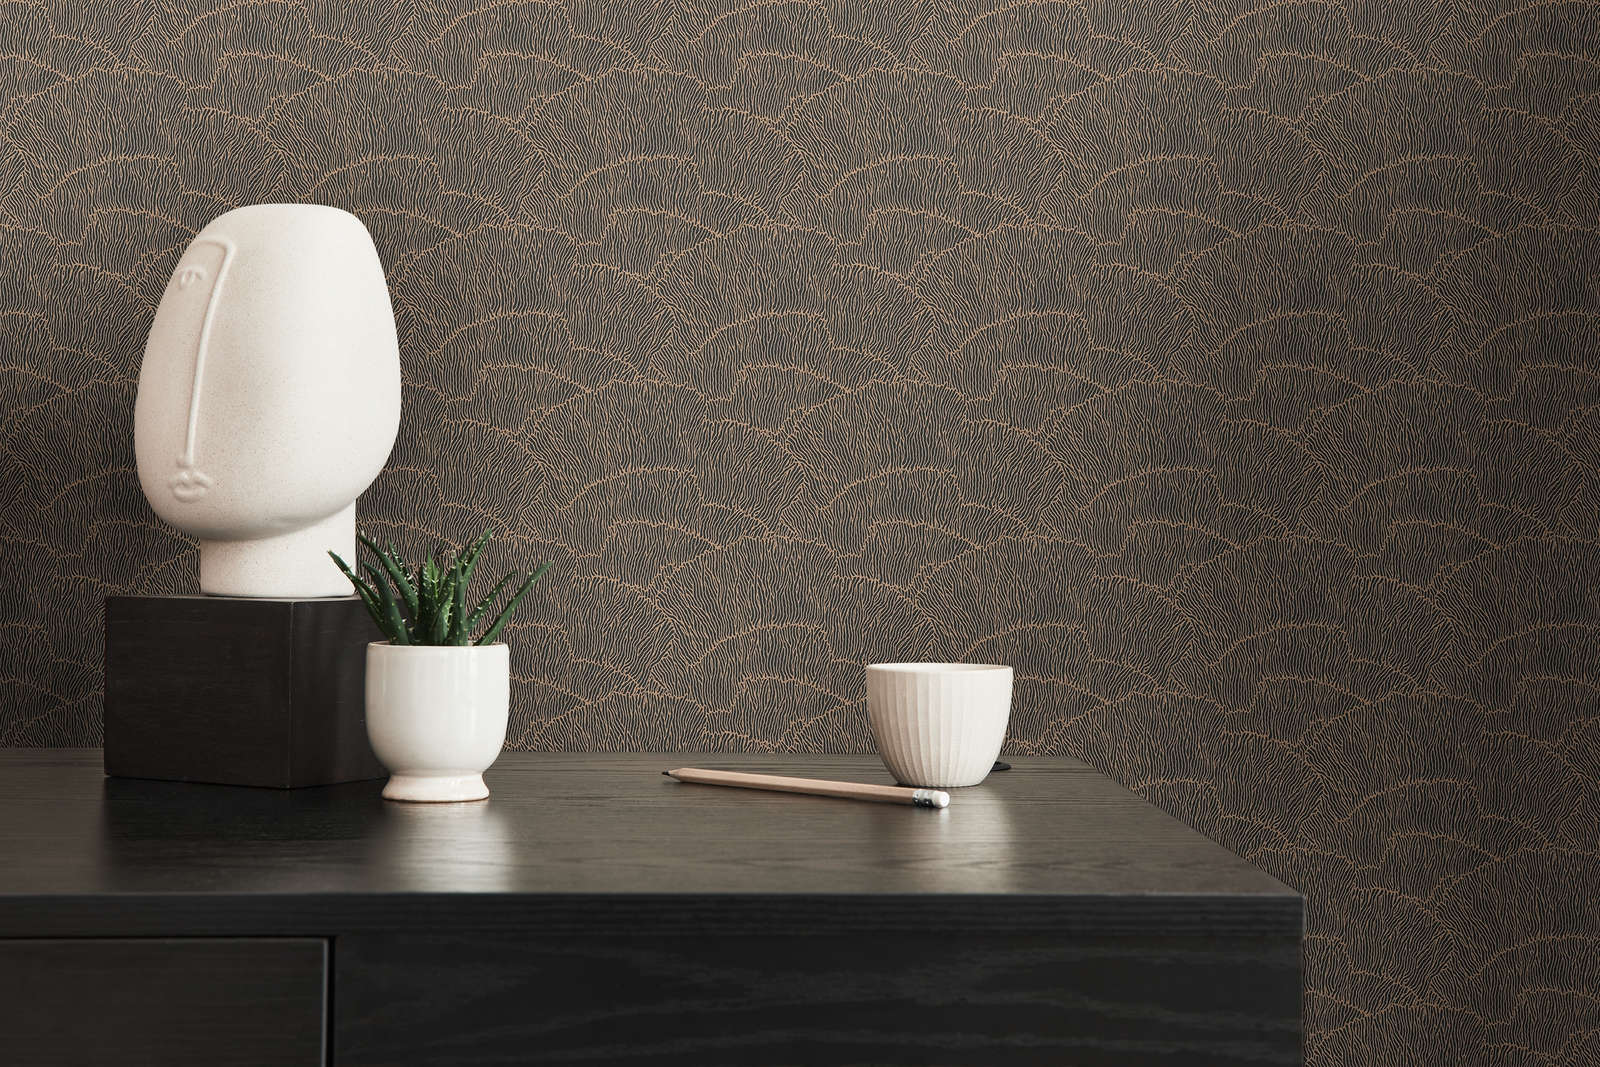             Non-woven wallpaper with line pattern - black, gold, metallic
        